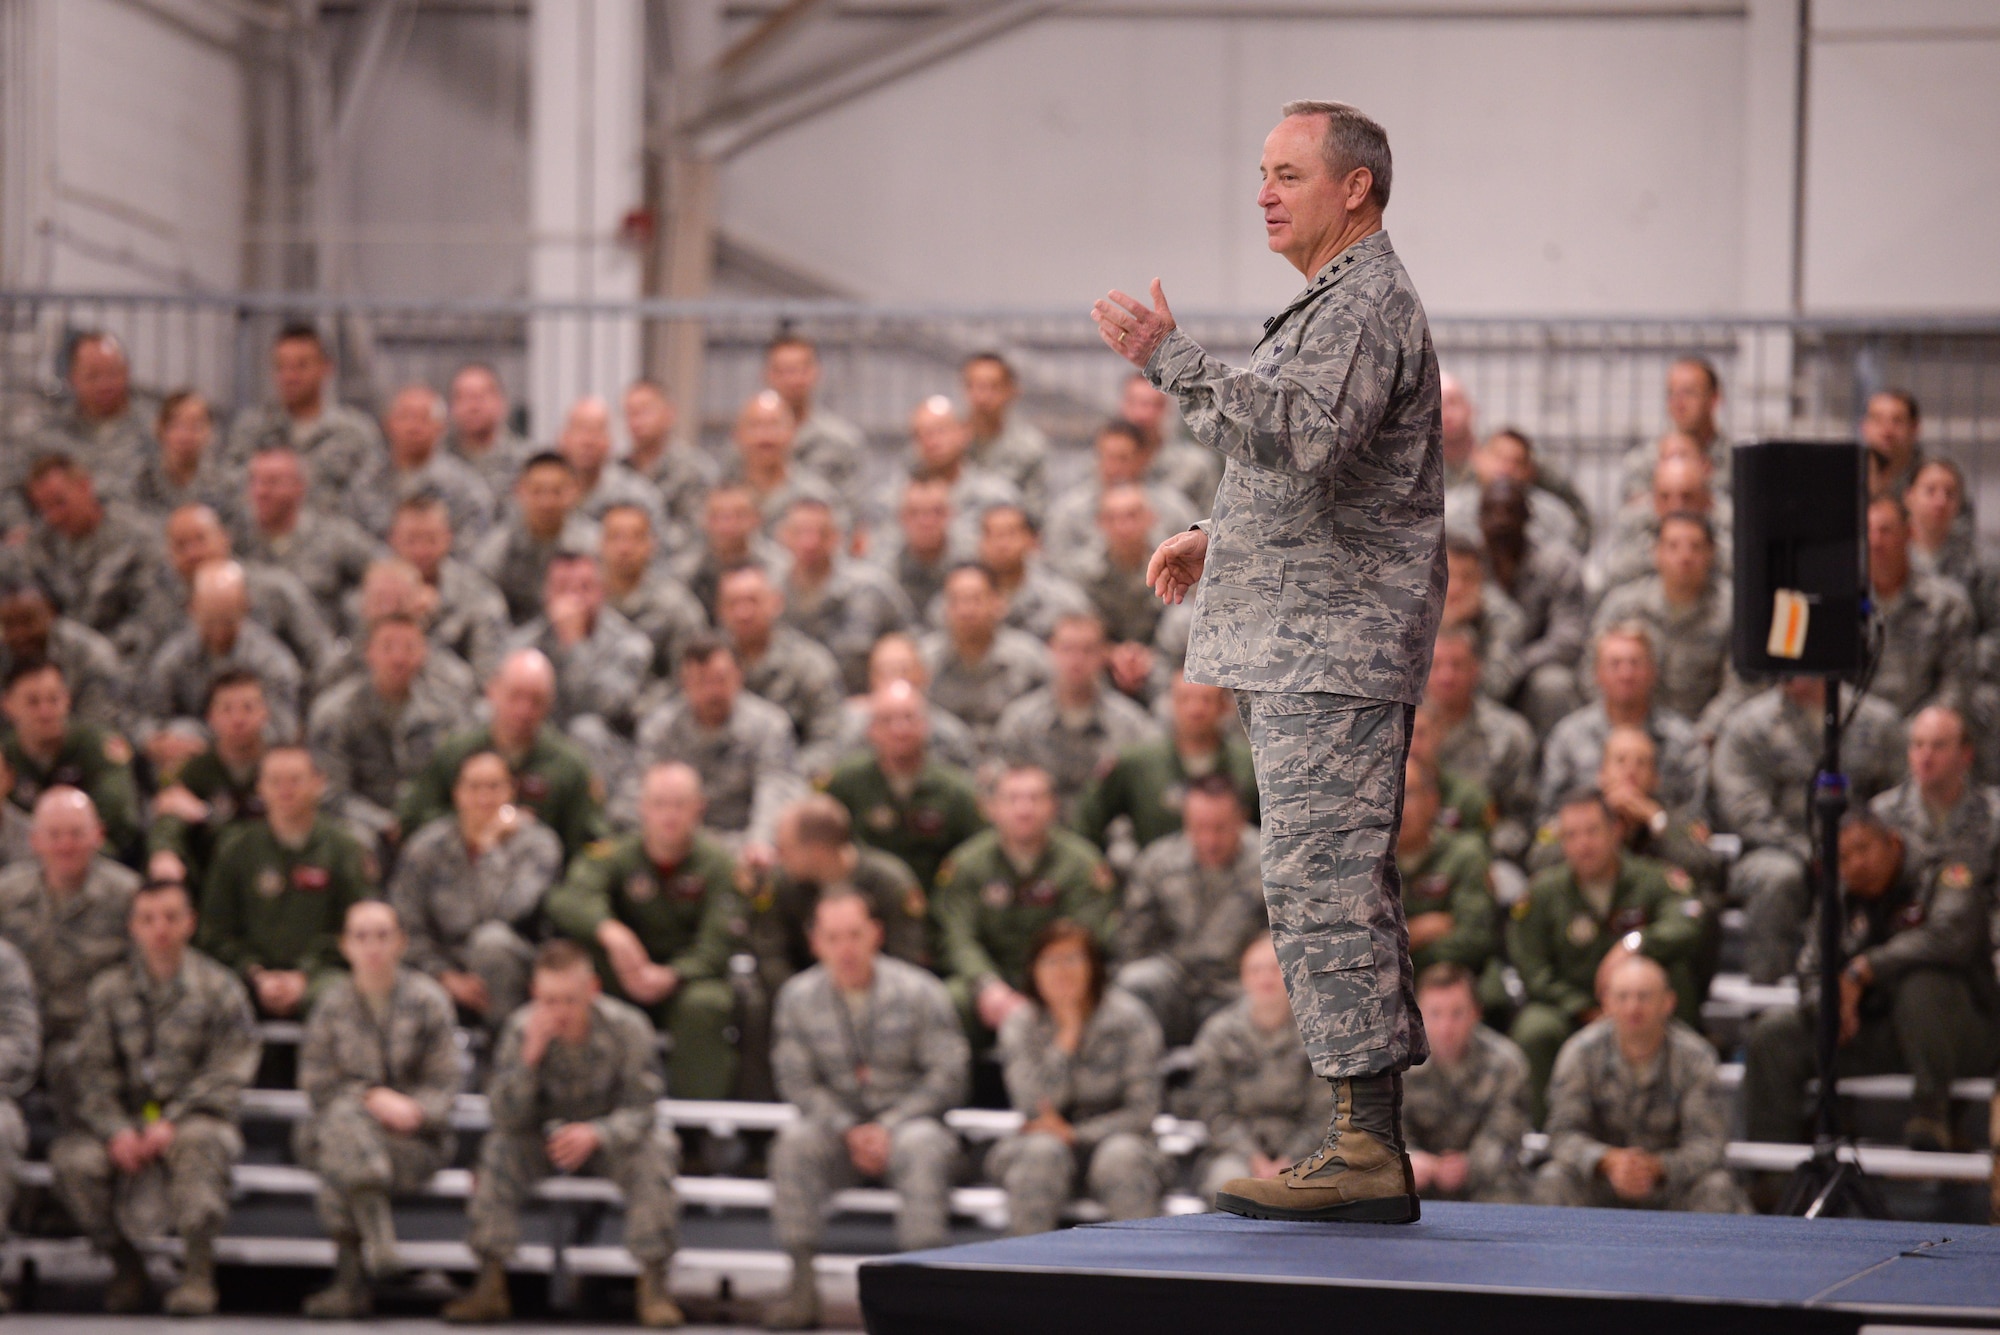 More than 1,000 Guard and Reserve Airmen had the opportunity to listen to U.S. Air Force Chief of Staff Gen Mark A. Welsh III speak April 11 about key issues affecting the Air Force. (U.S. Air Force photo/Staff Sgt. Caleb Wanzer)